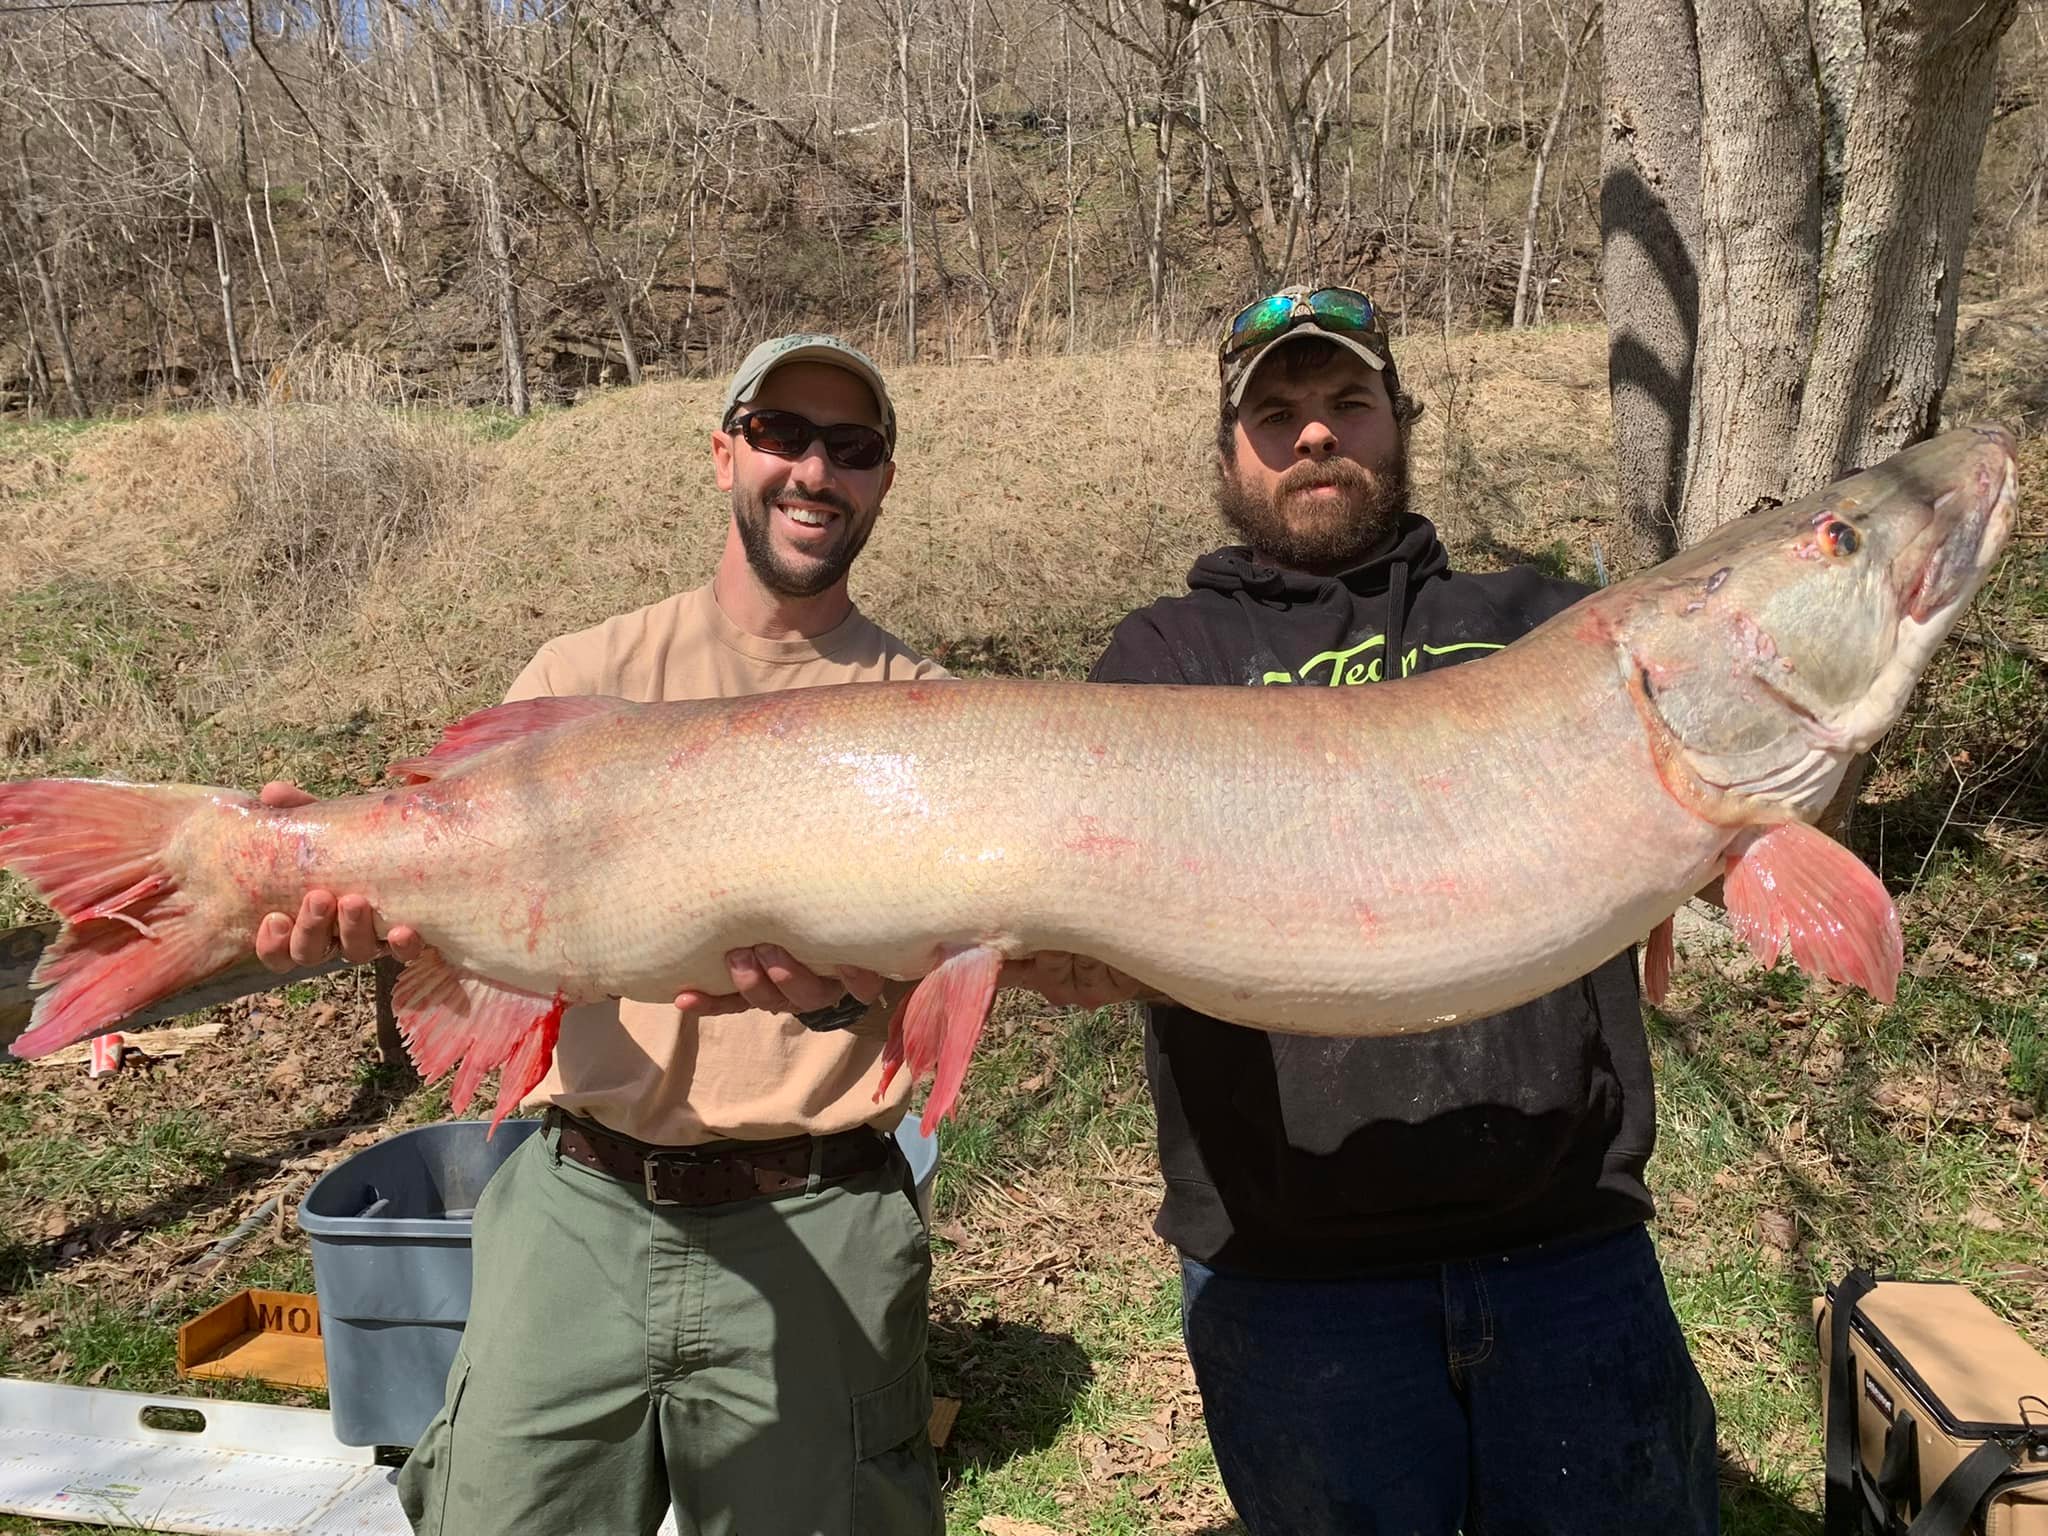 West Virginia Angler Catches Record-Breaking Muskie, Throws It Back in Lake